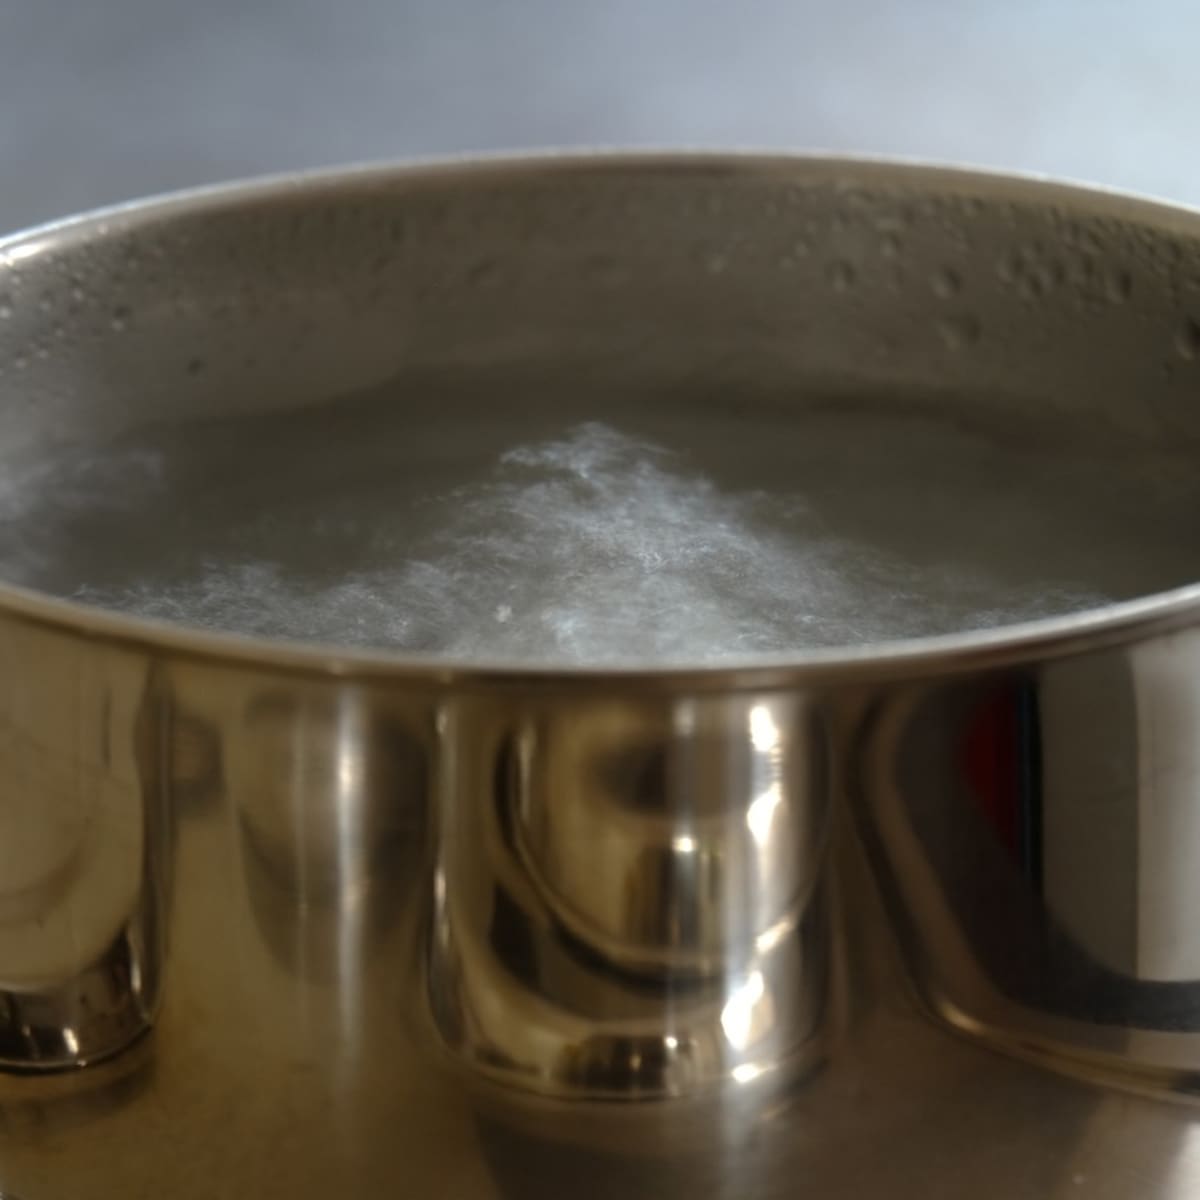 What Is A Double Boiler And When Should You Use One?